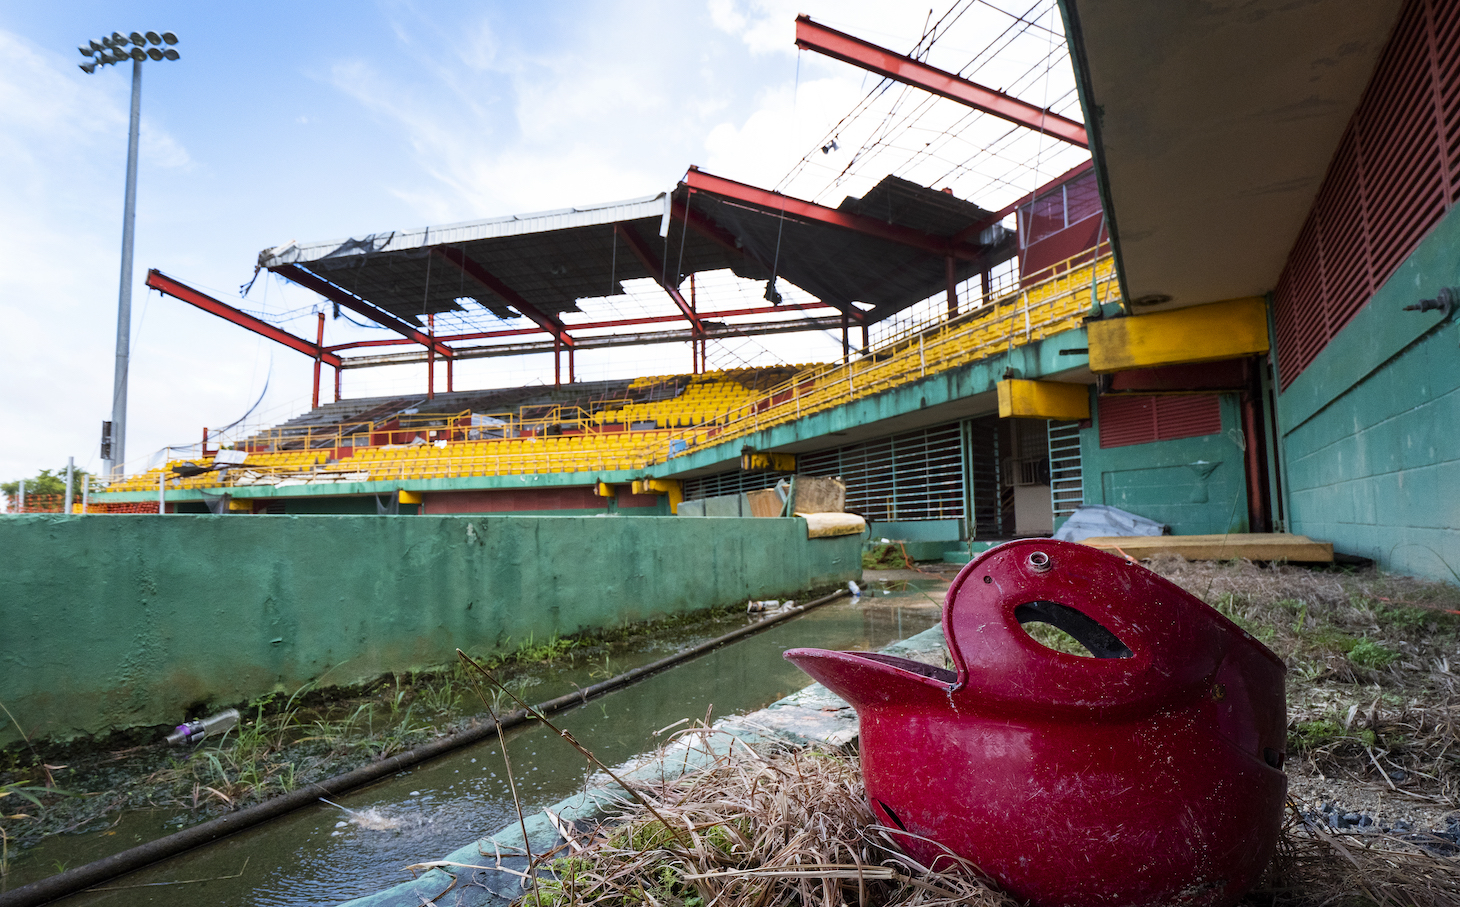 CAROLINA, PUERTO RICO - NOVEMBER 13: A remaining batting helmet sits on the field at the Roberto Clemente Municipal Stadium on November 13, 2018 in Carolina, Puerto Rico. The ballpark was once used for minor league AA baseball. The stadium is set to be demolished due to the extended damage it sustained from Hurricane Maria. The effort continues in Puerto Rico to remain and rebuild more than one year after the Hurricane Maria hit and devastated the island on September 20, 2017. The official number of deaths from the disaster is 2,975. (Photo by Al Bello/Getty Images for Lumix)